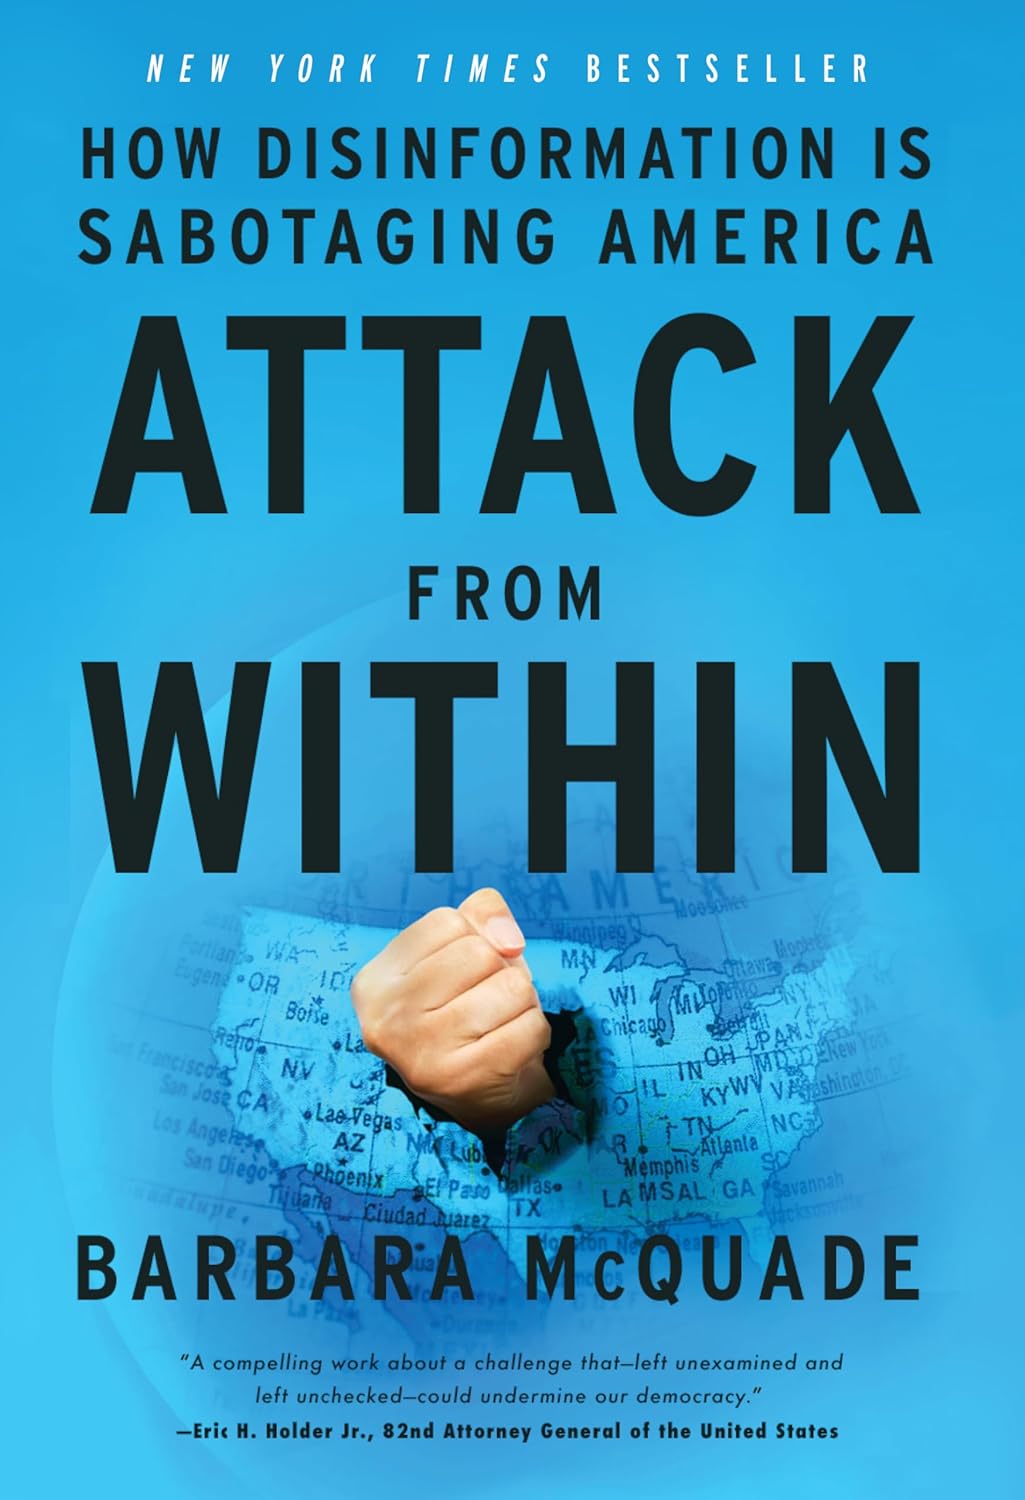 One of our recommended books is Attack From Within by Barbara McQuade